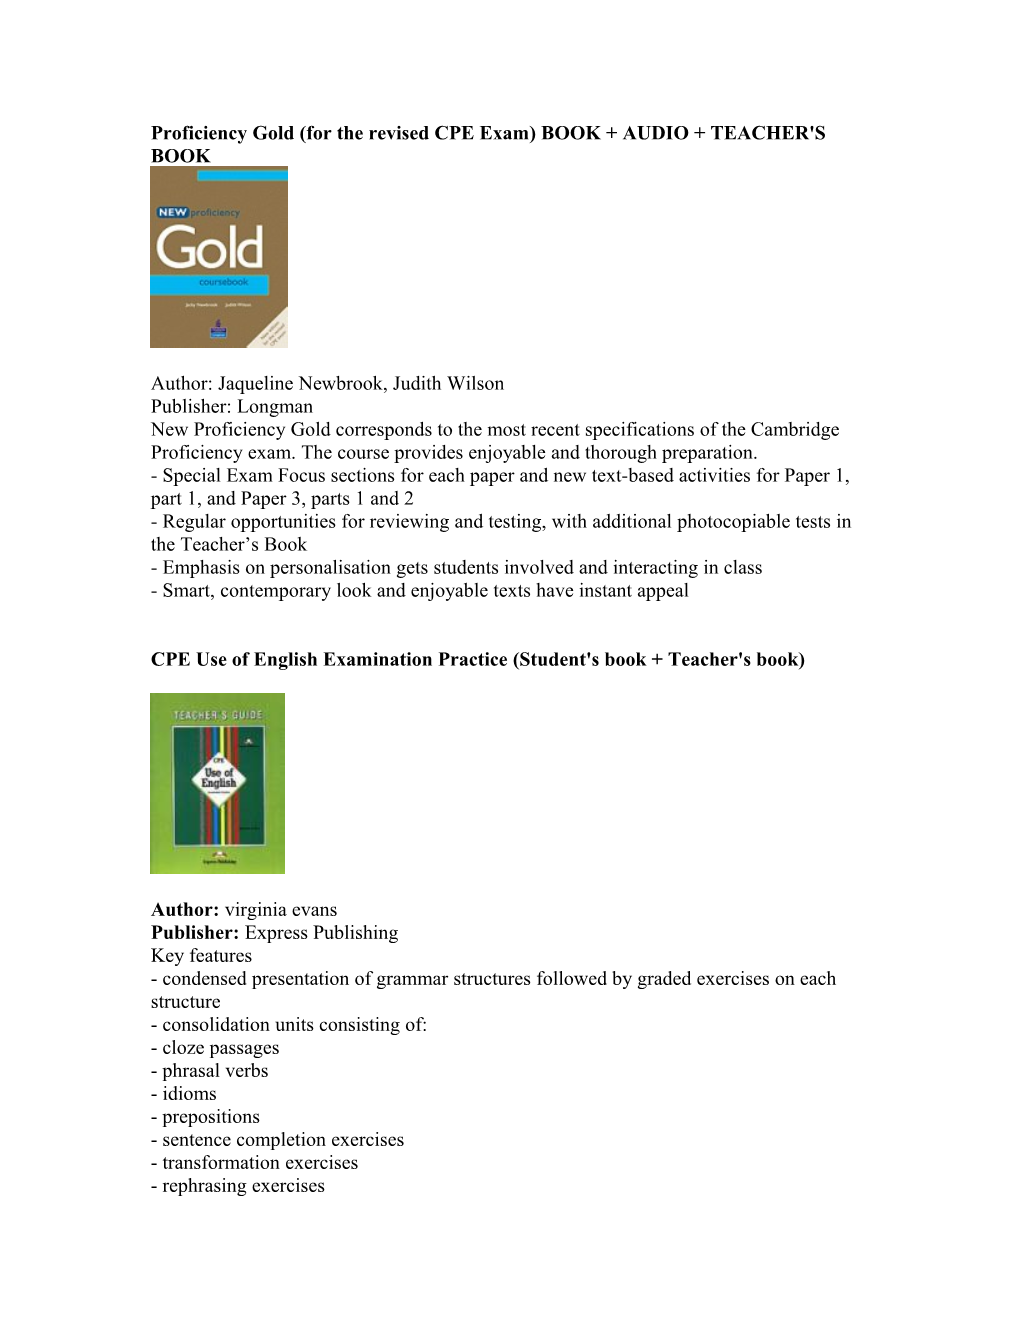 Proficiency Gold (For the Revised CPE Exam) BOOK + AUDIO + TEACHER's BOOK